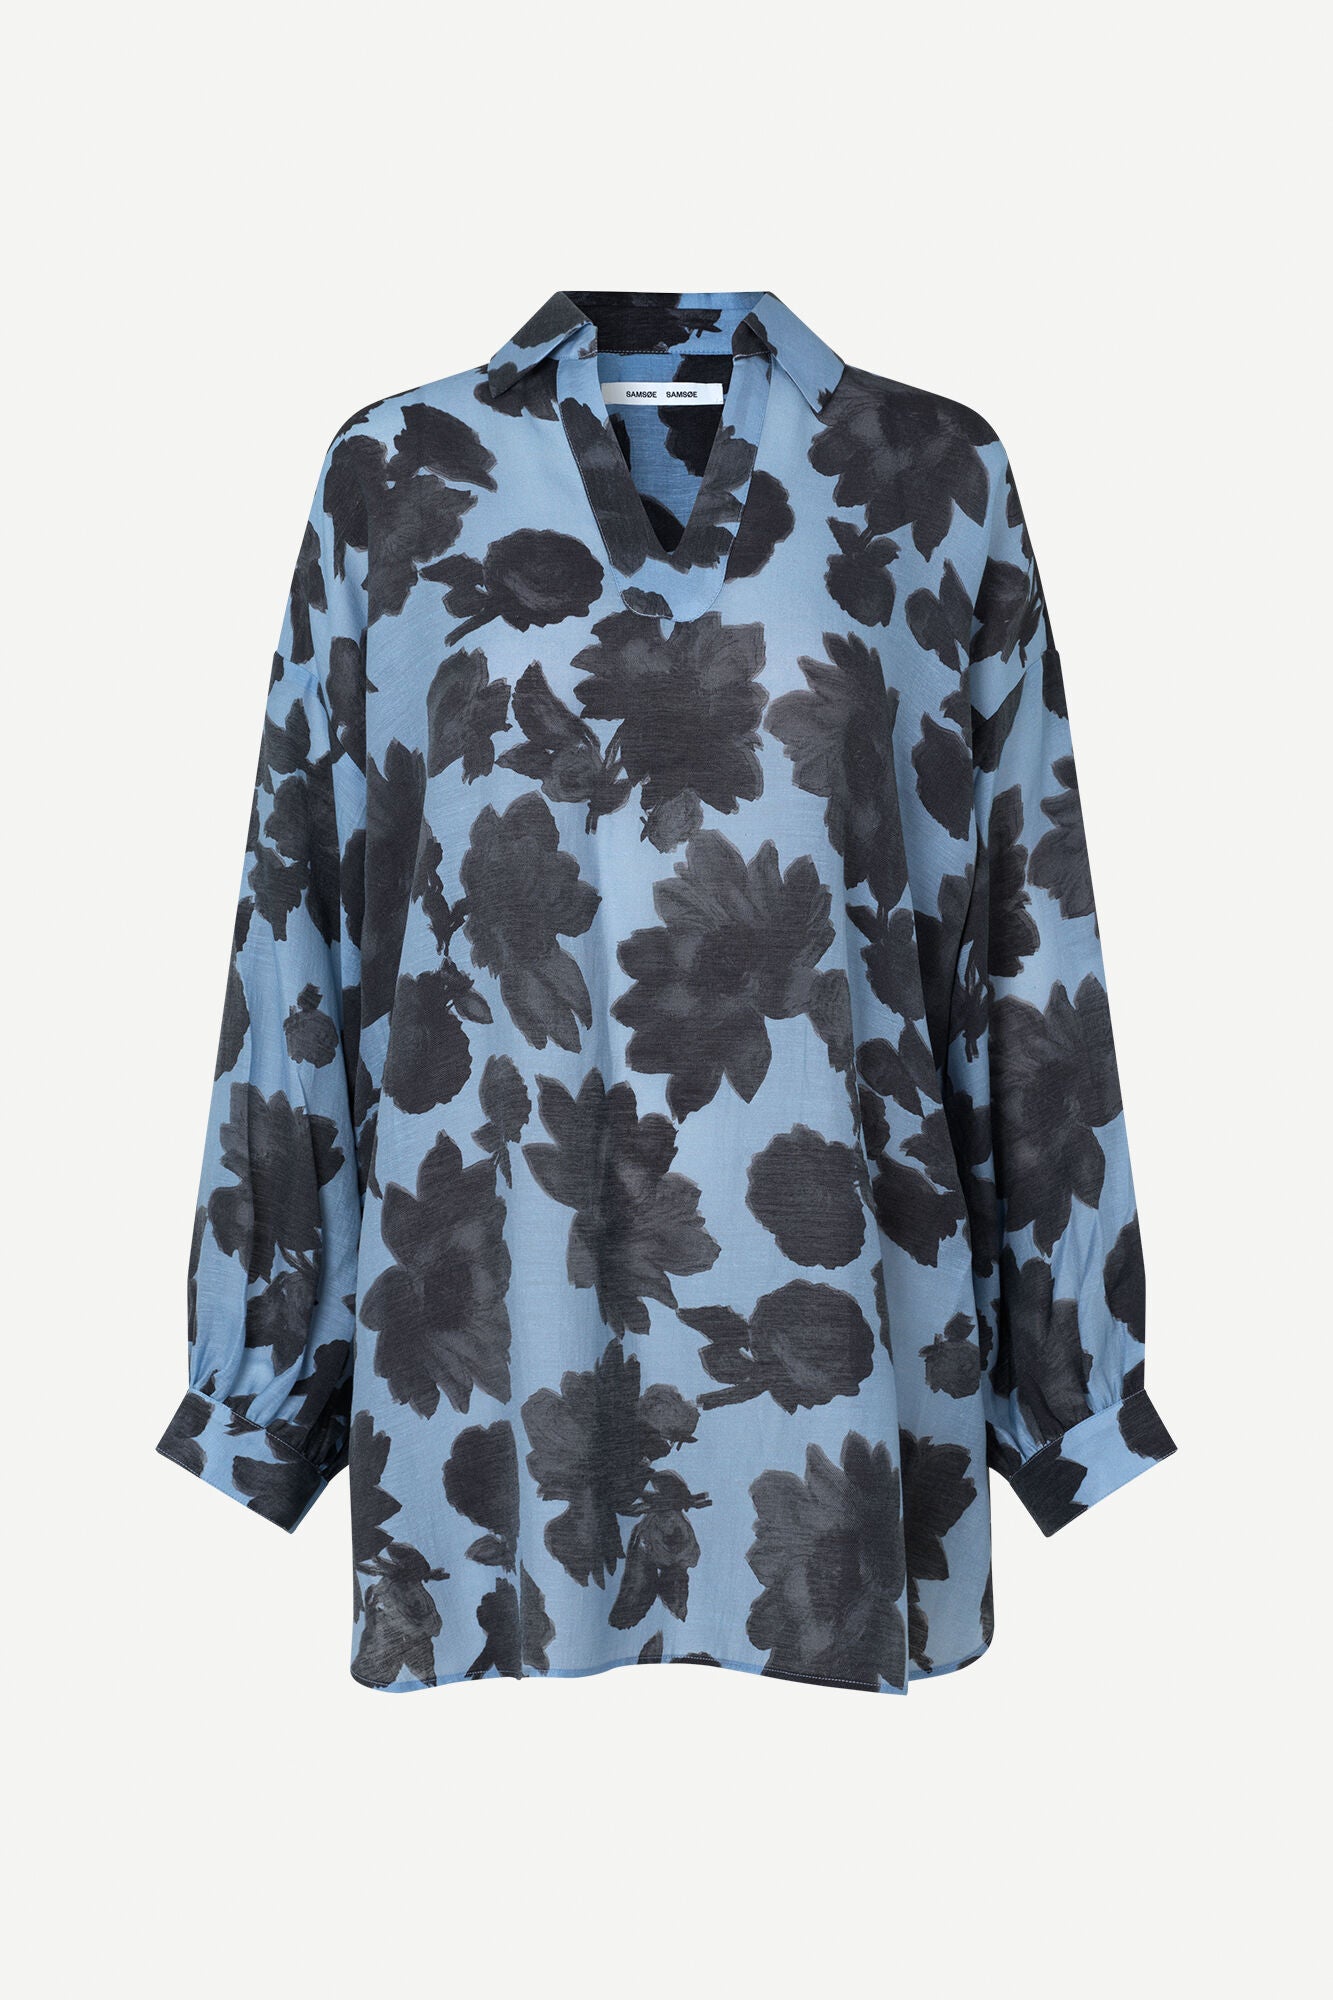 Over size tencel blend blouse in pale blue with a dark grey floral print